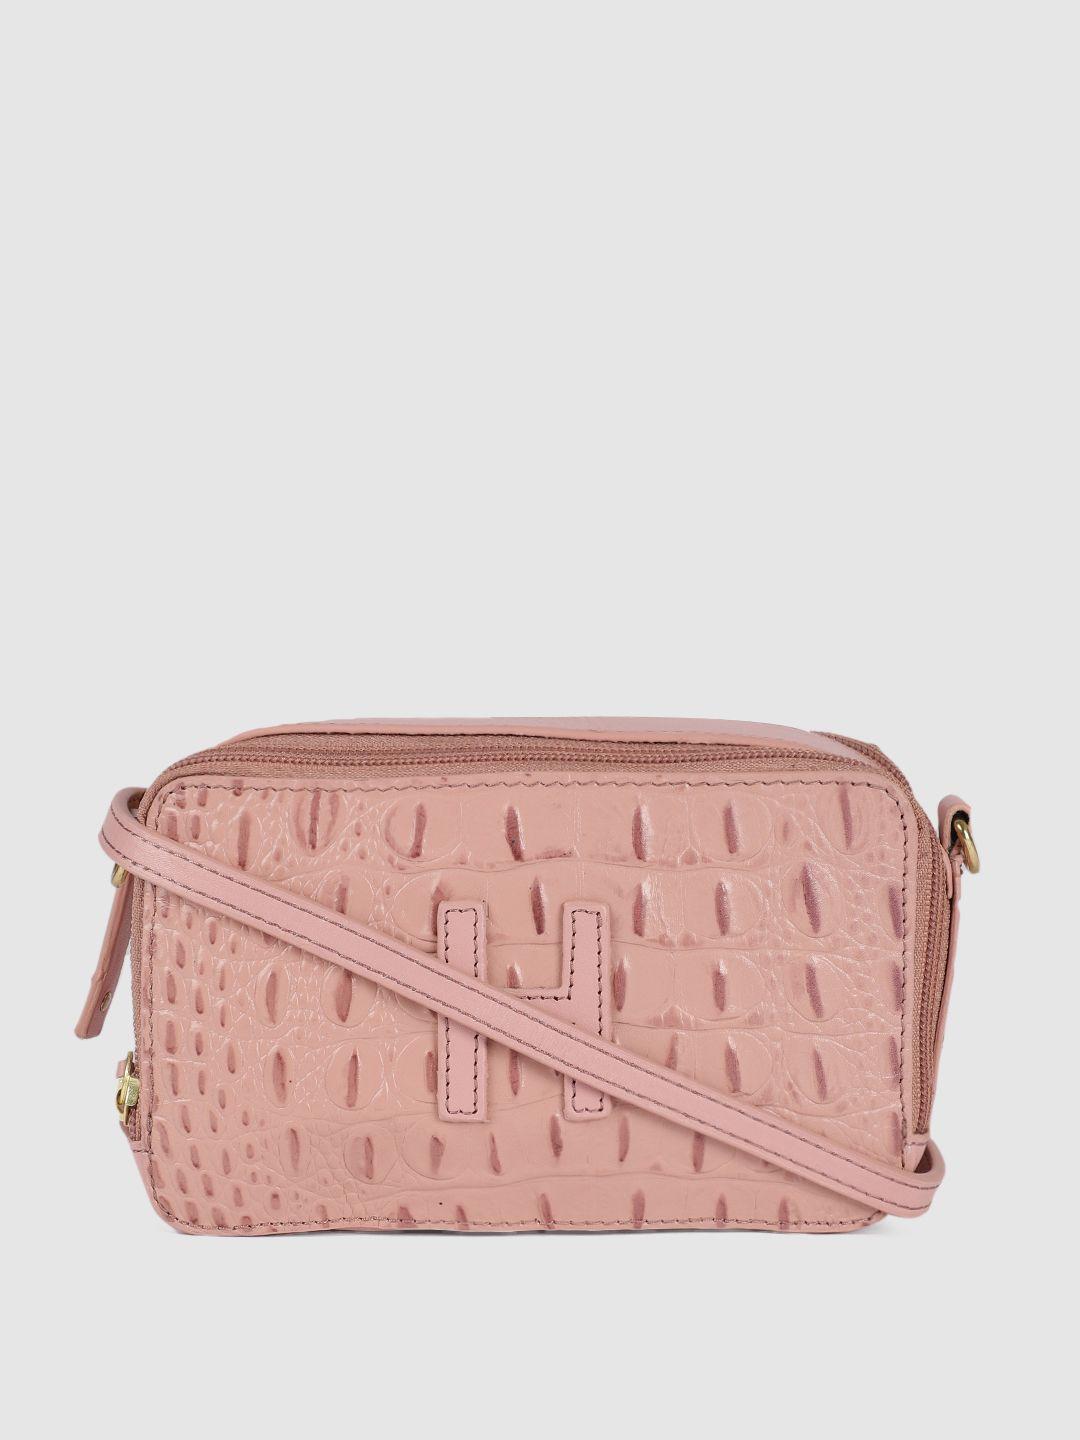 hidesign pink textured leather structured sling bag